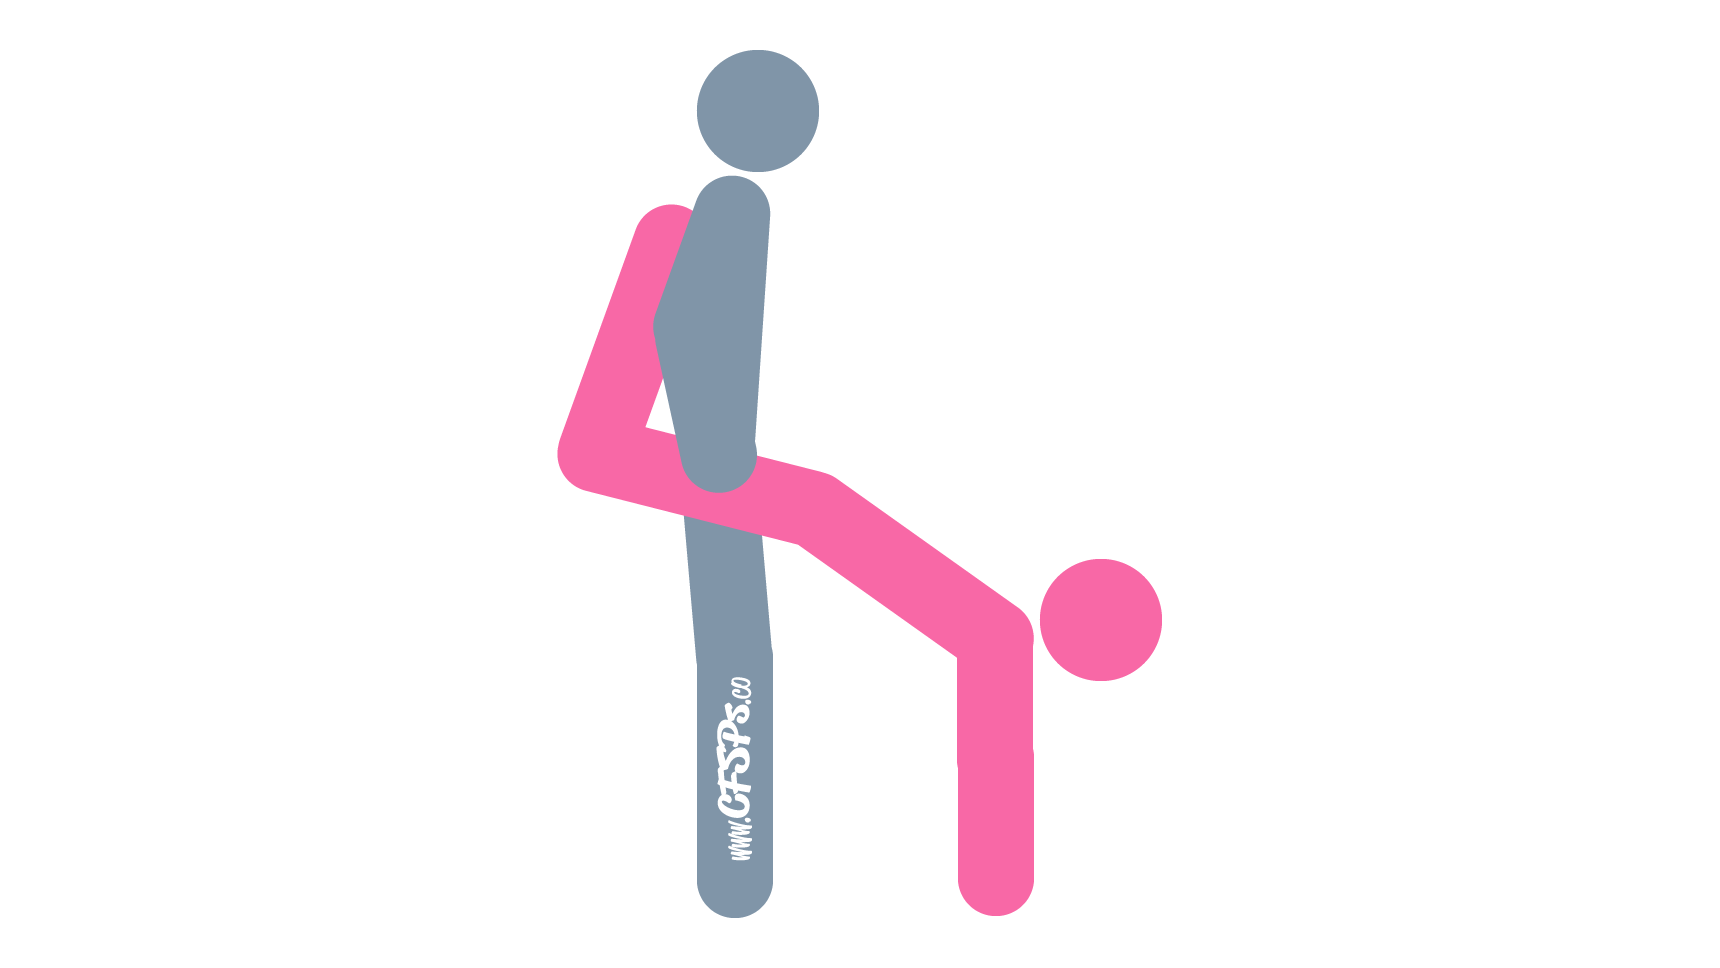 This stick figure image depicts a man and woman having sex in the Indian Headstand sex position. The man is standing with his legs together. The woman is straddling his pelvis while the man holds her up by her thighs, and she supports her upper body with her arms on the floor.